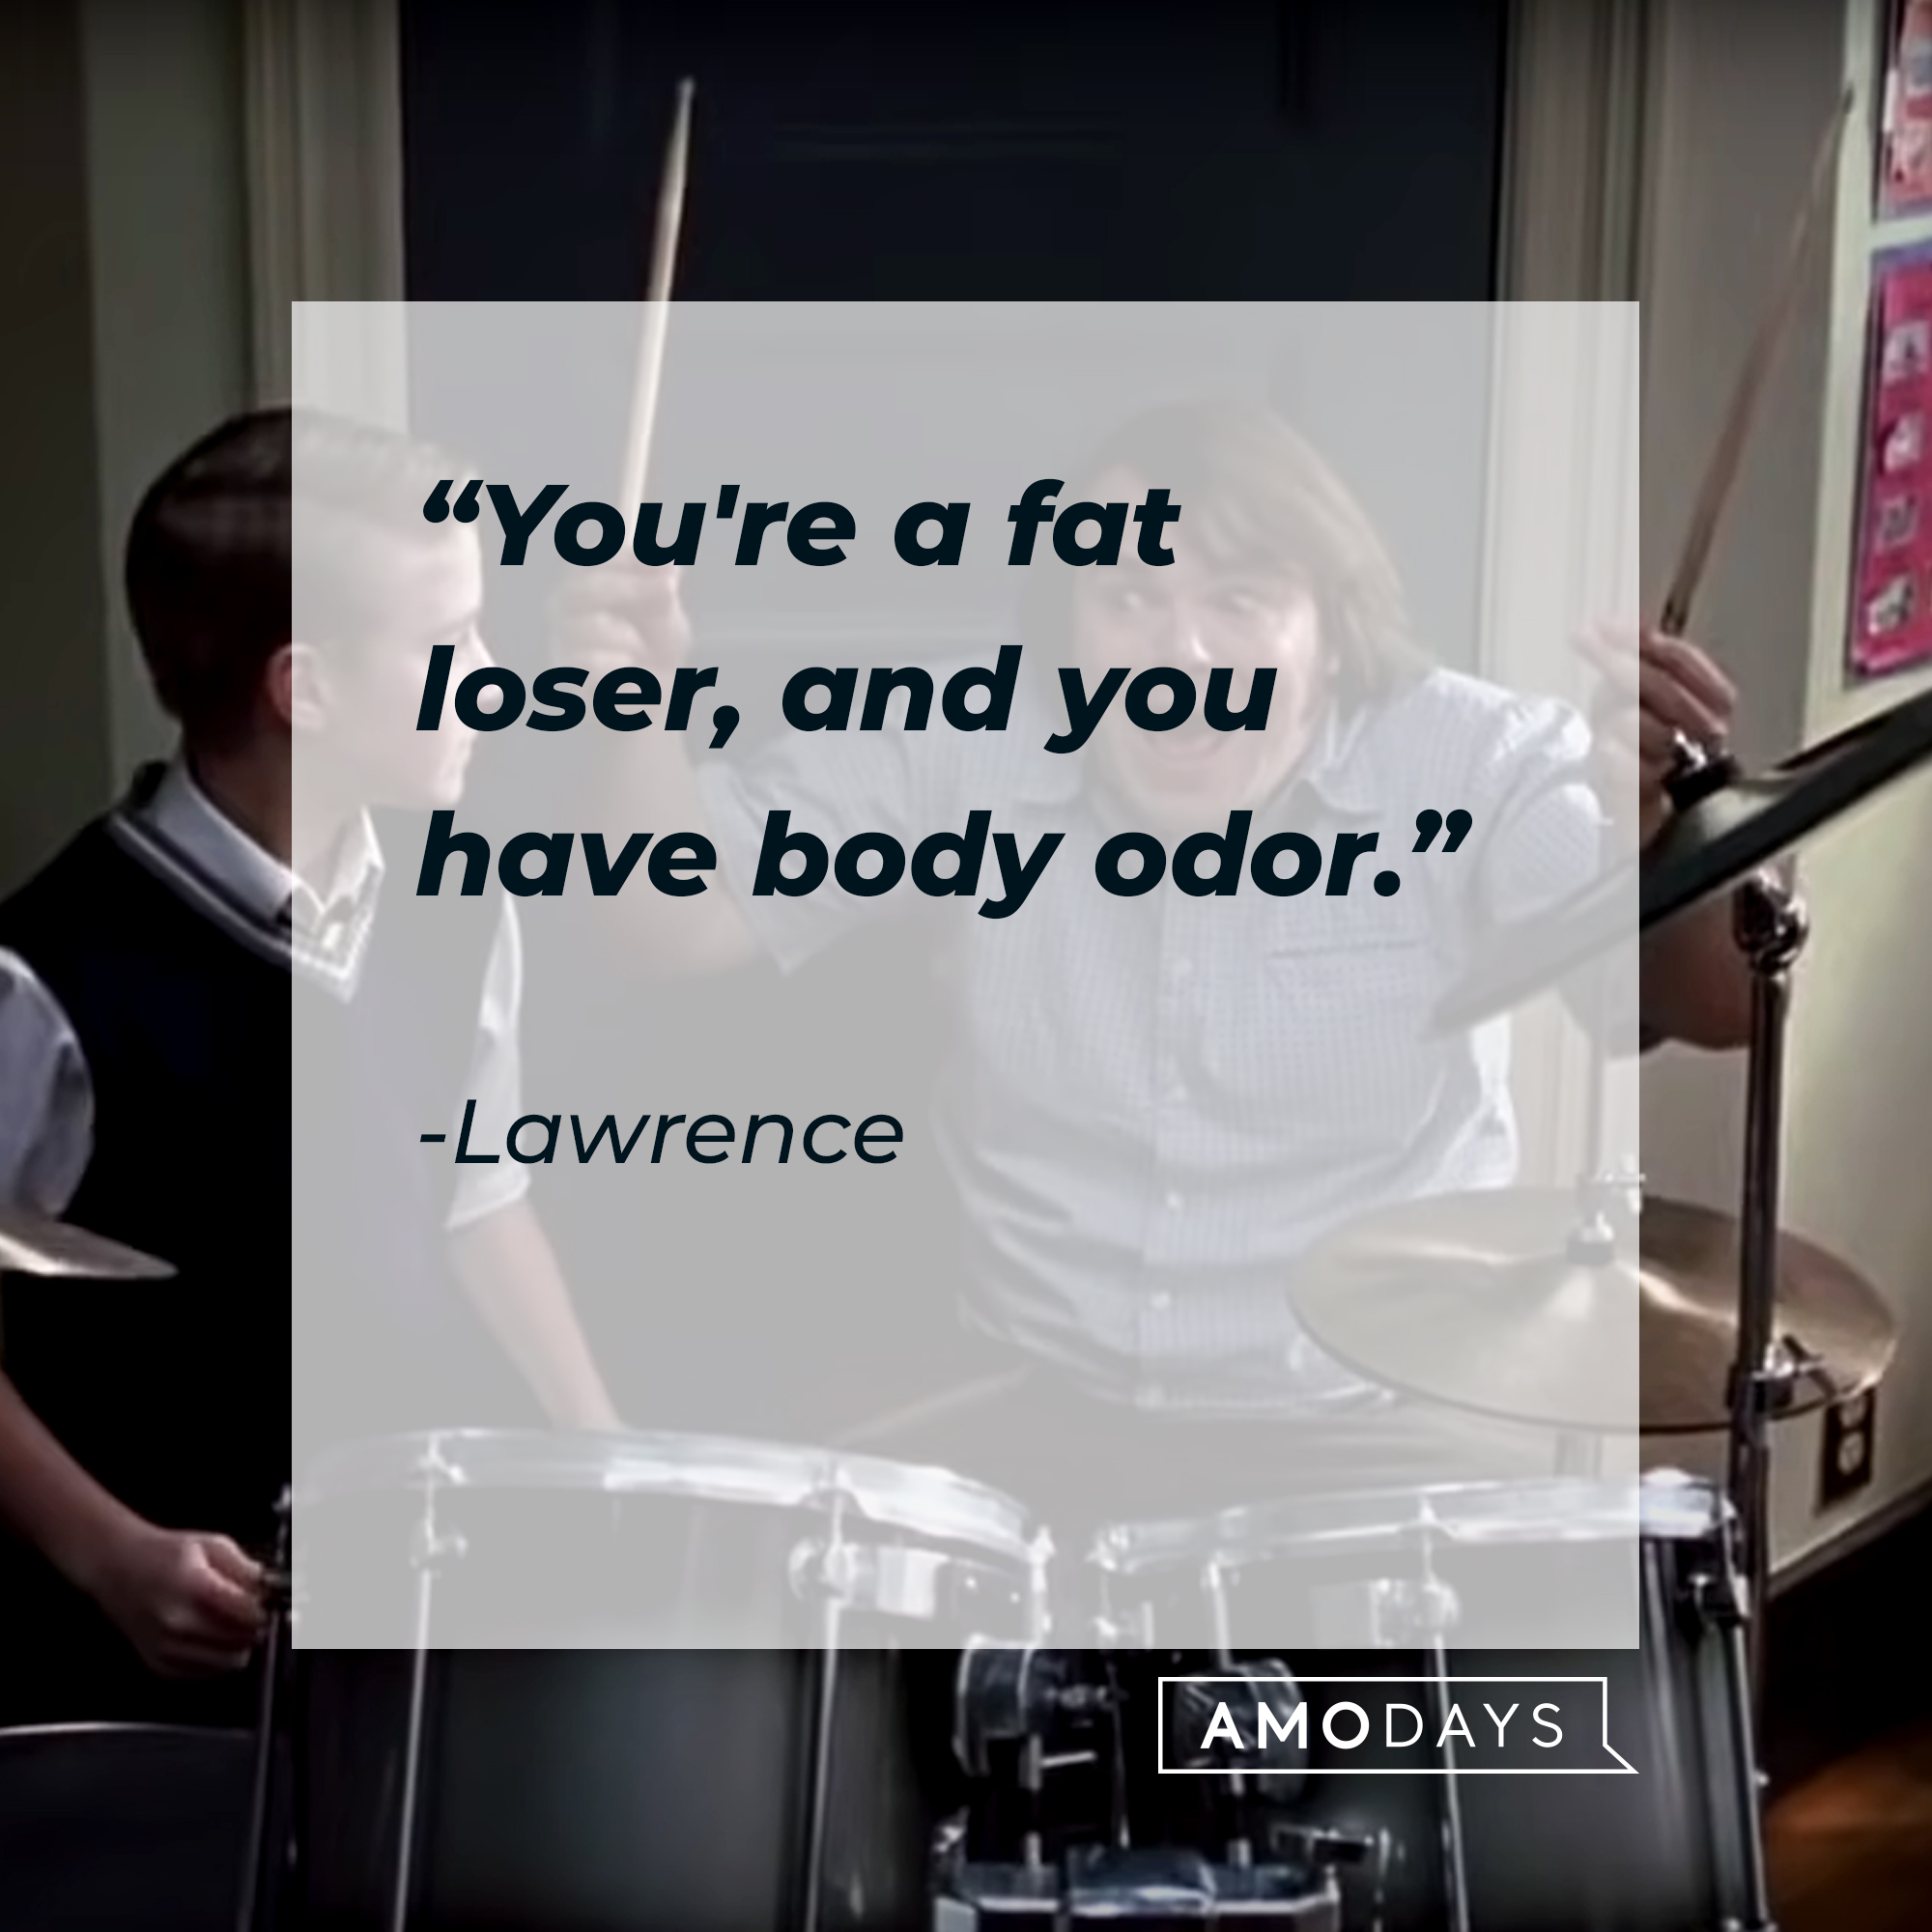 Freddy Jones and Dewey Finn, with Lawrence’s quote: "You're a fat loser, and you have body odor." | Source: youtube.com/paramountpictures